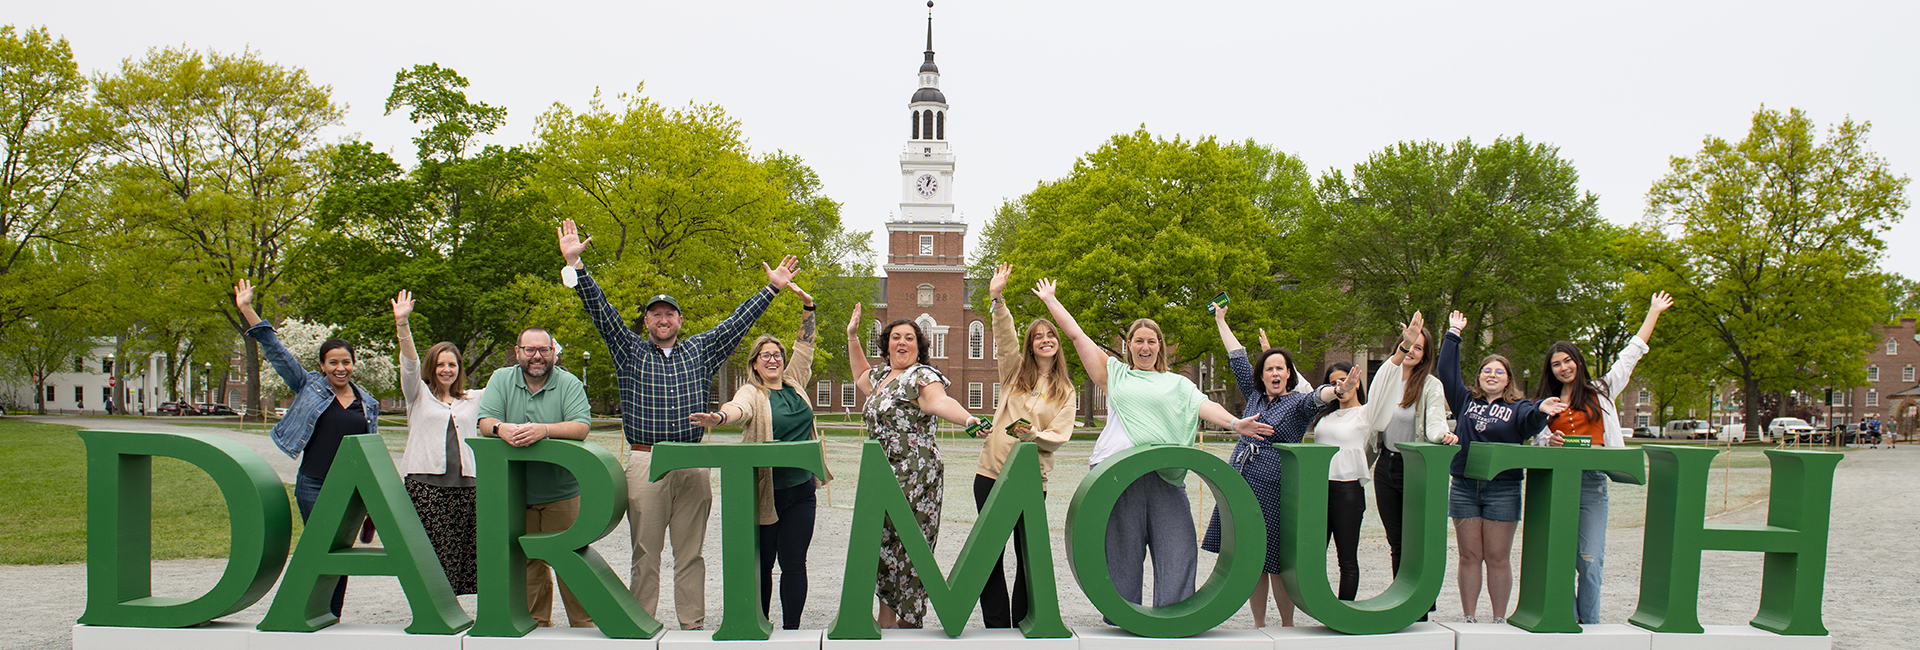 Dartmouth Alumni Relations staff standing behind the Dartmouth letters on the Dartmouth Green with Baker Tower in the background